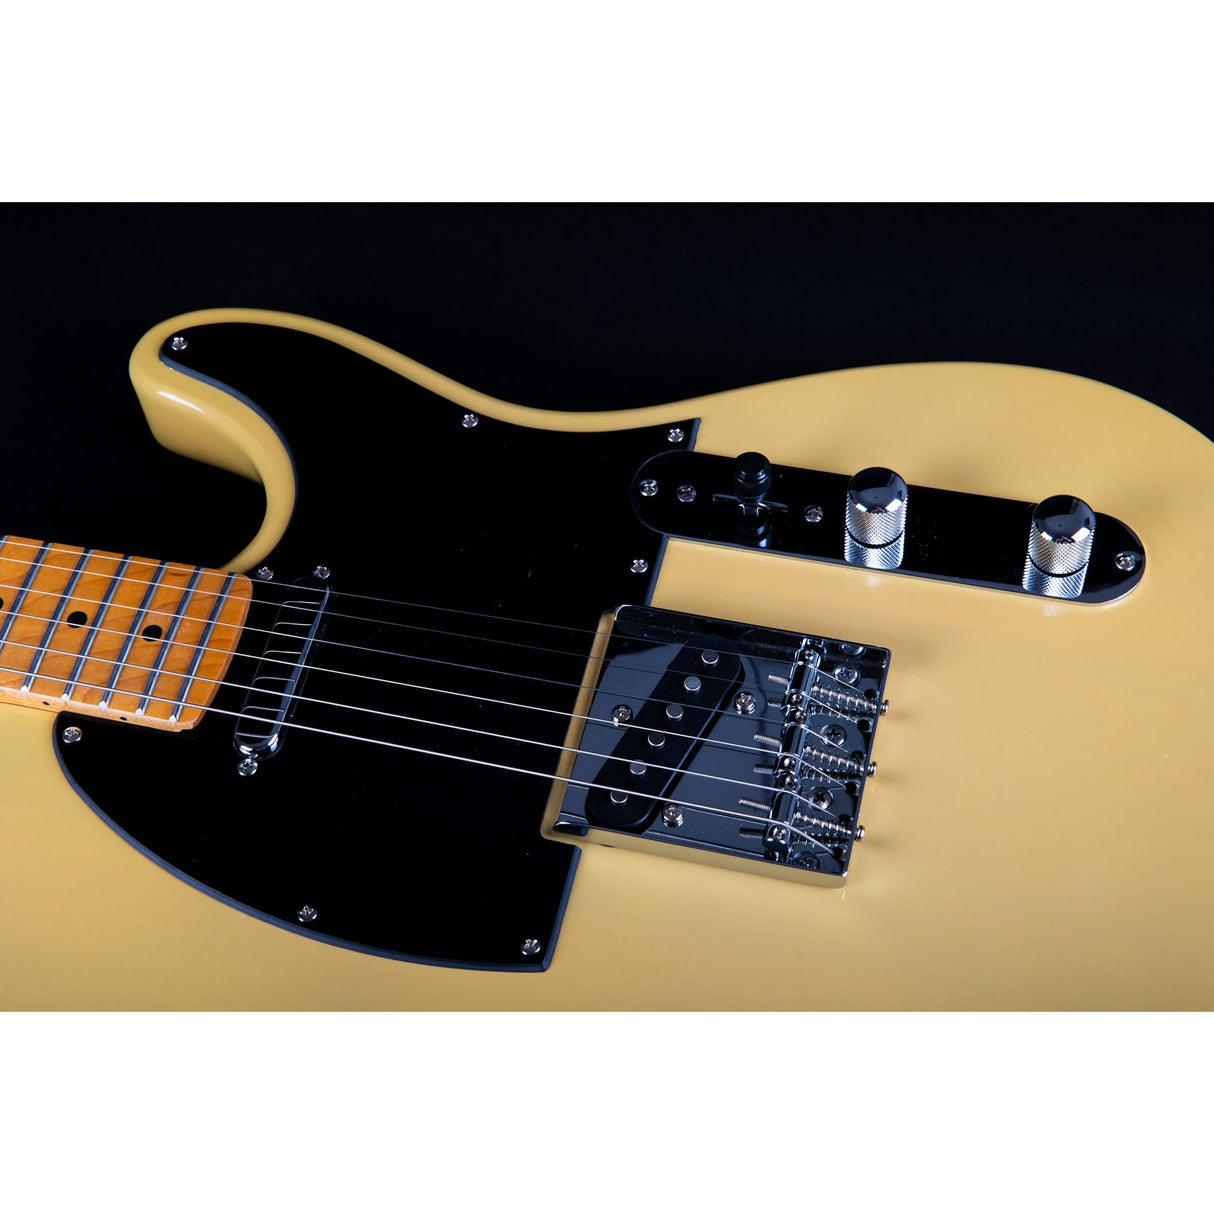 Jet Guitars JT-350 BSC SS Basswood Body Electric Guitar with Roasted Maple Neck and Fretboard